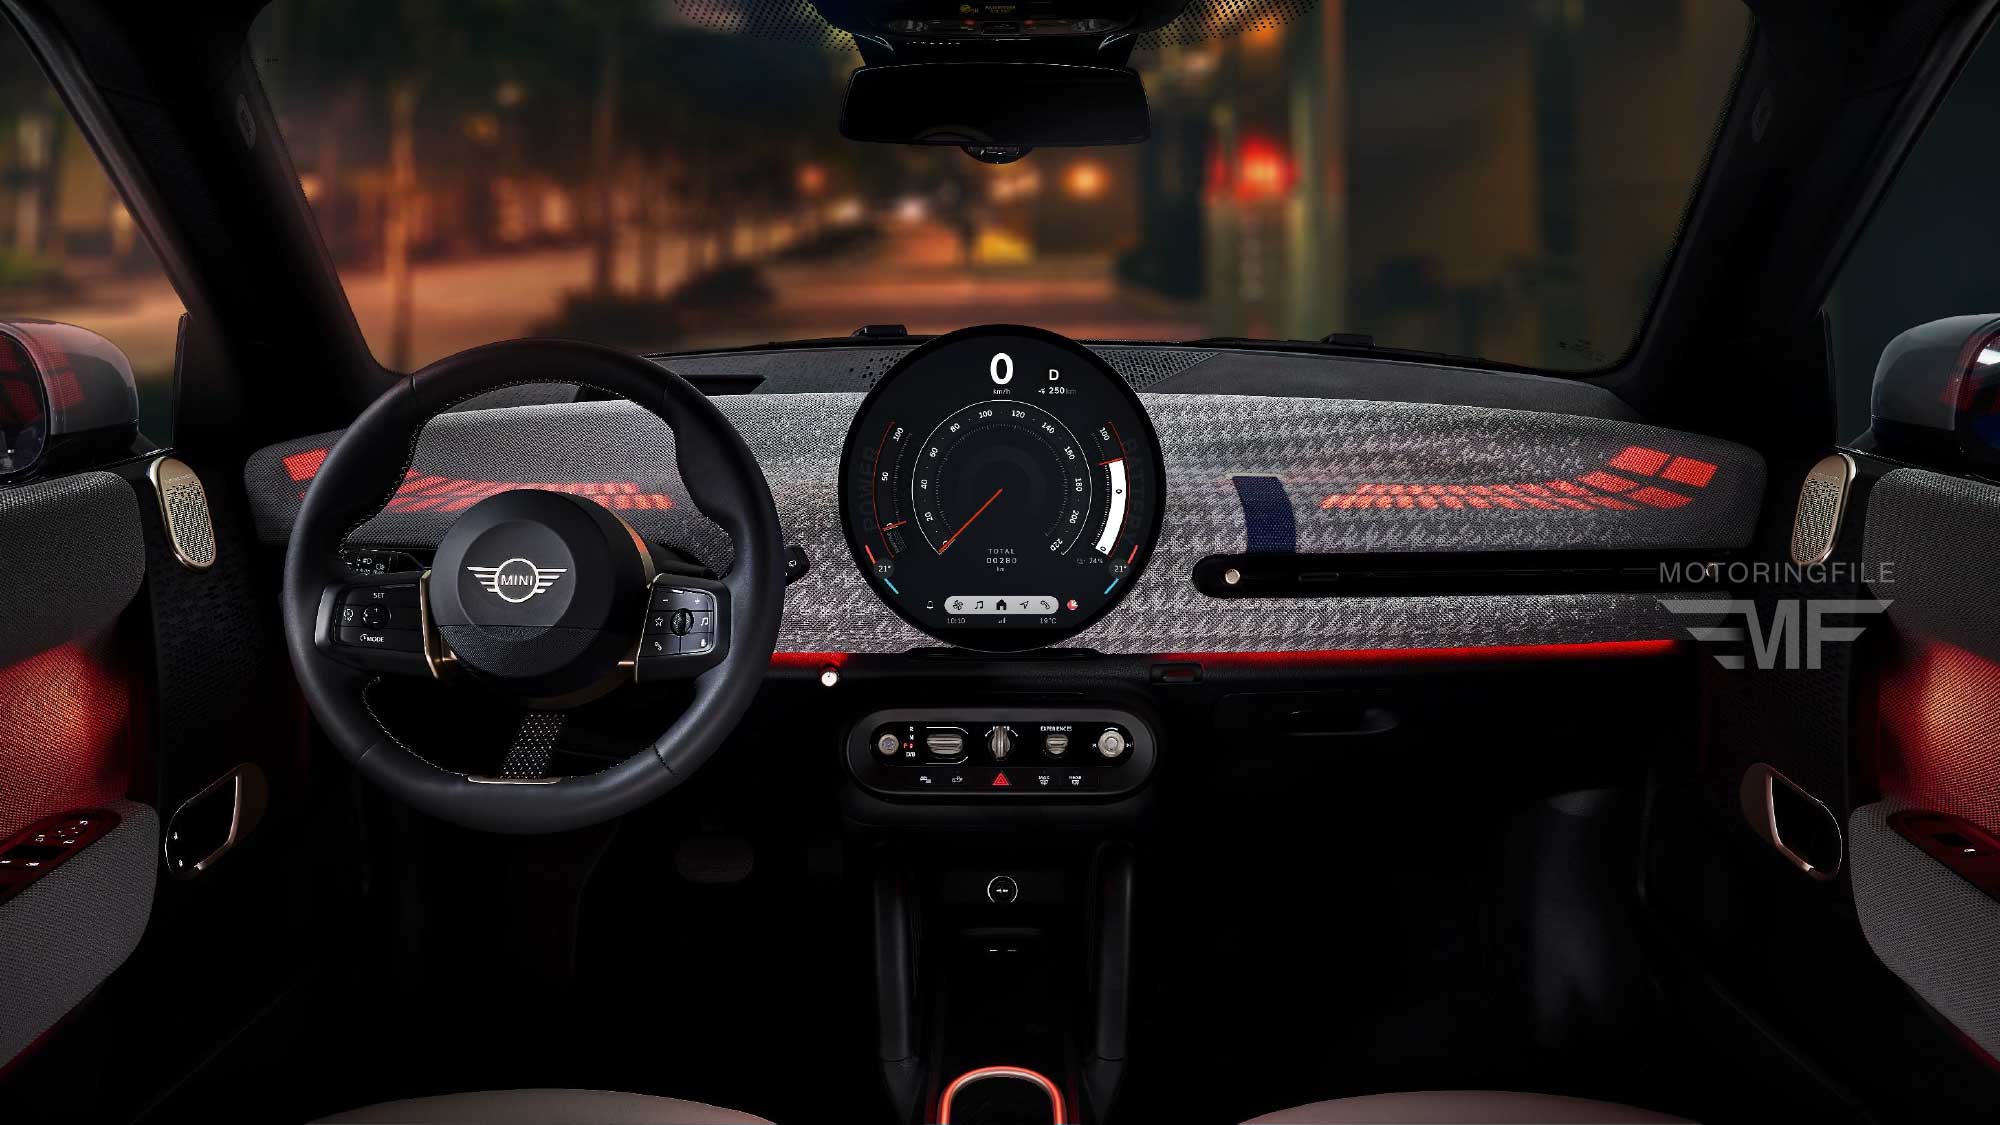 Mini Electric Interaction Unit - Experience Modes - GoKart Interface in car showing rev counter